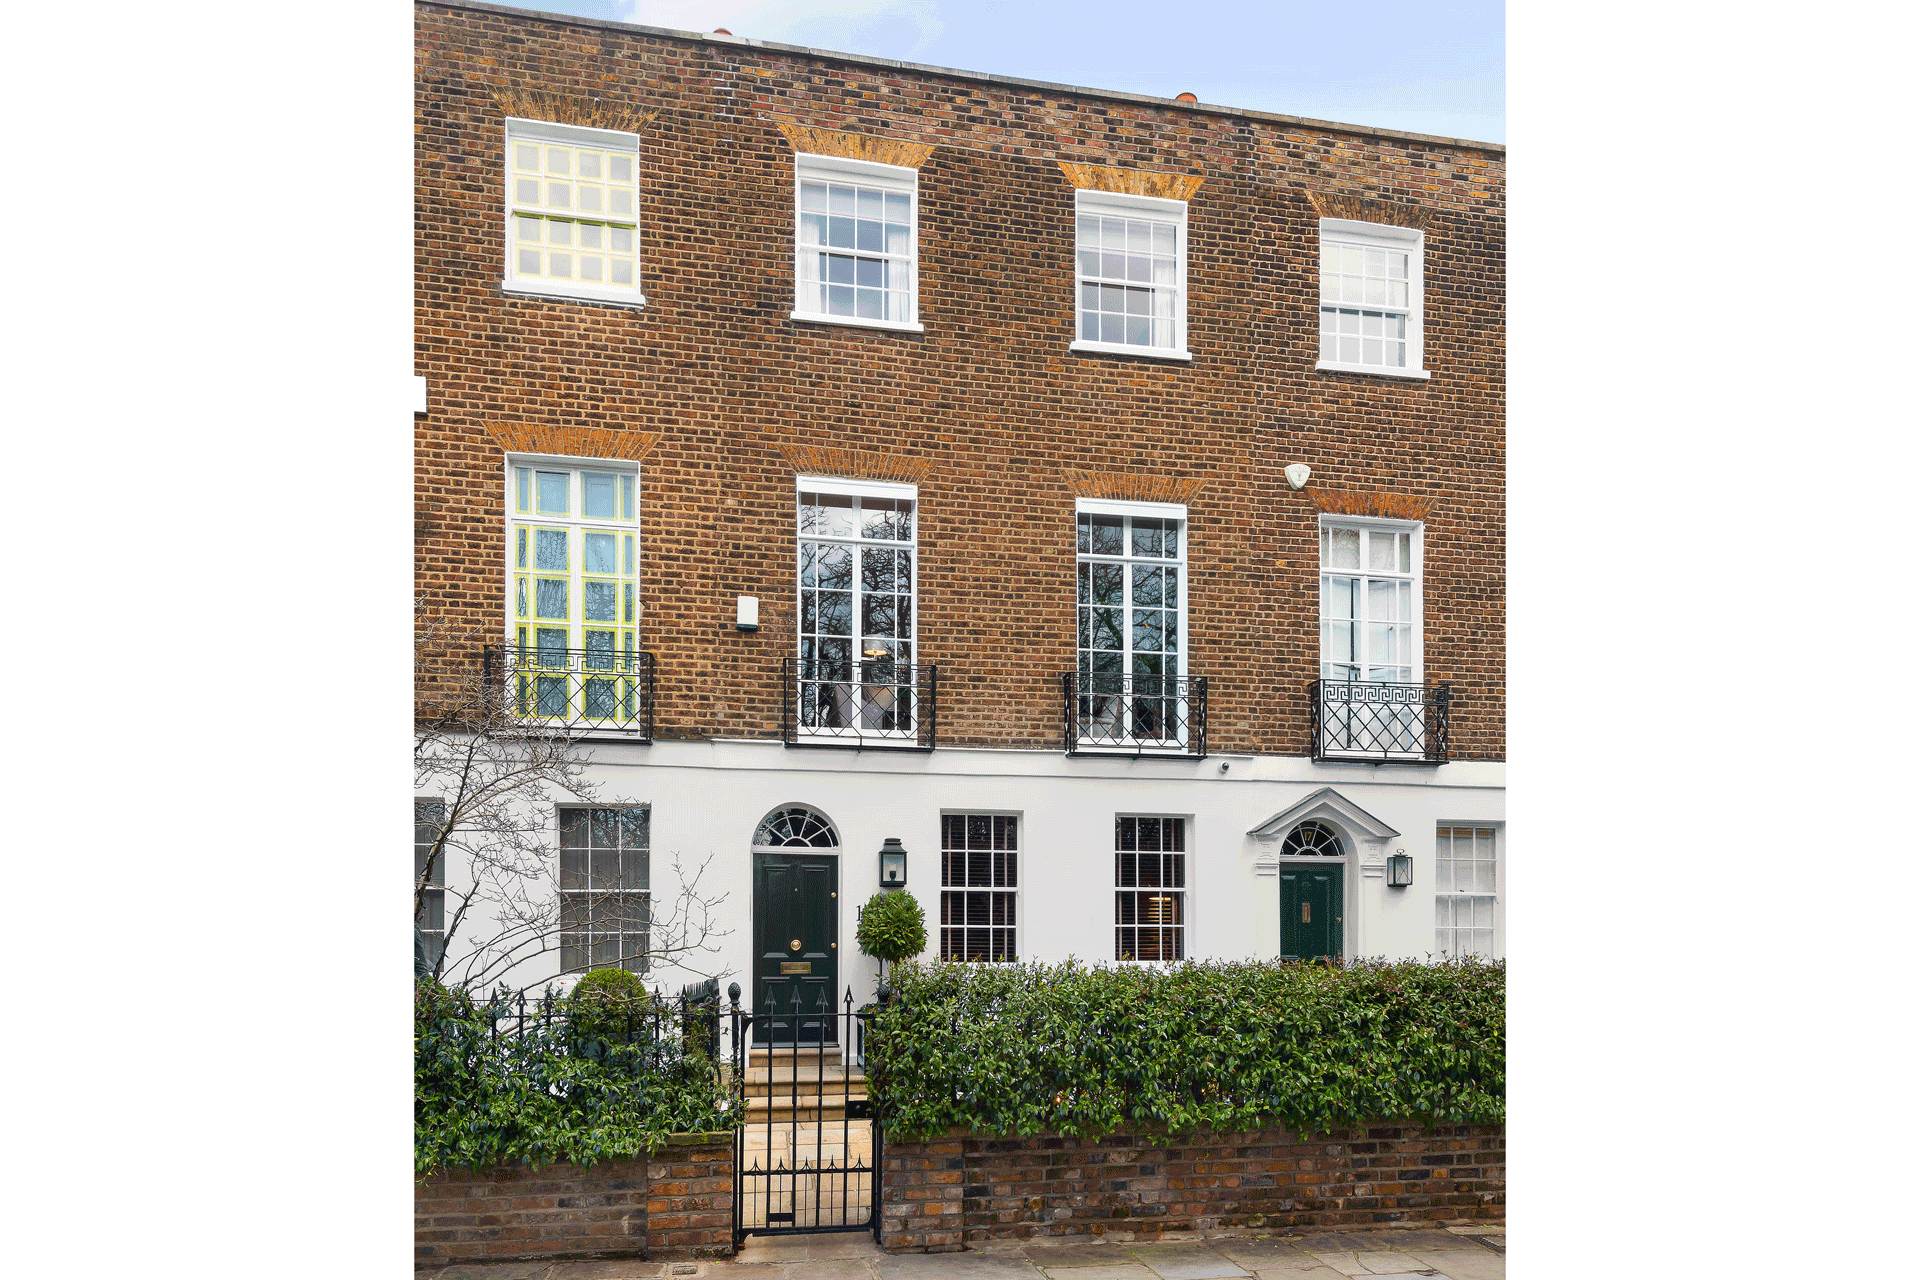 Exterior of a Georgian townhouse in Edwardes Square